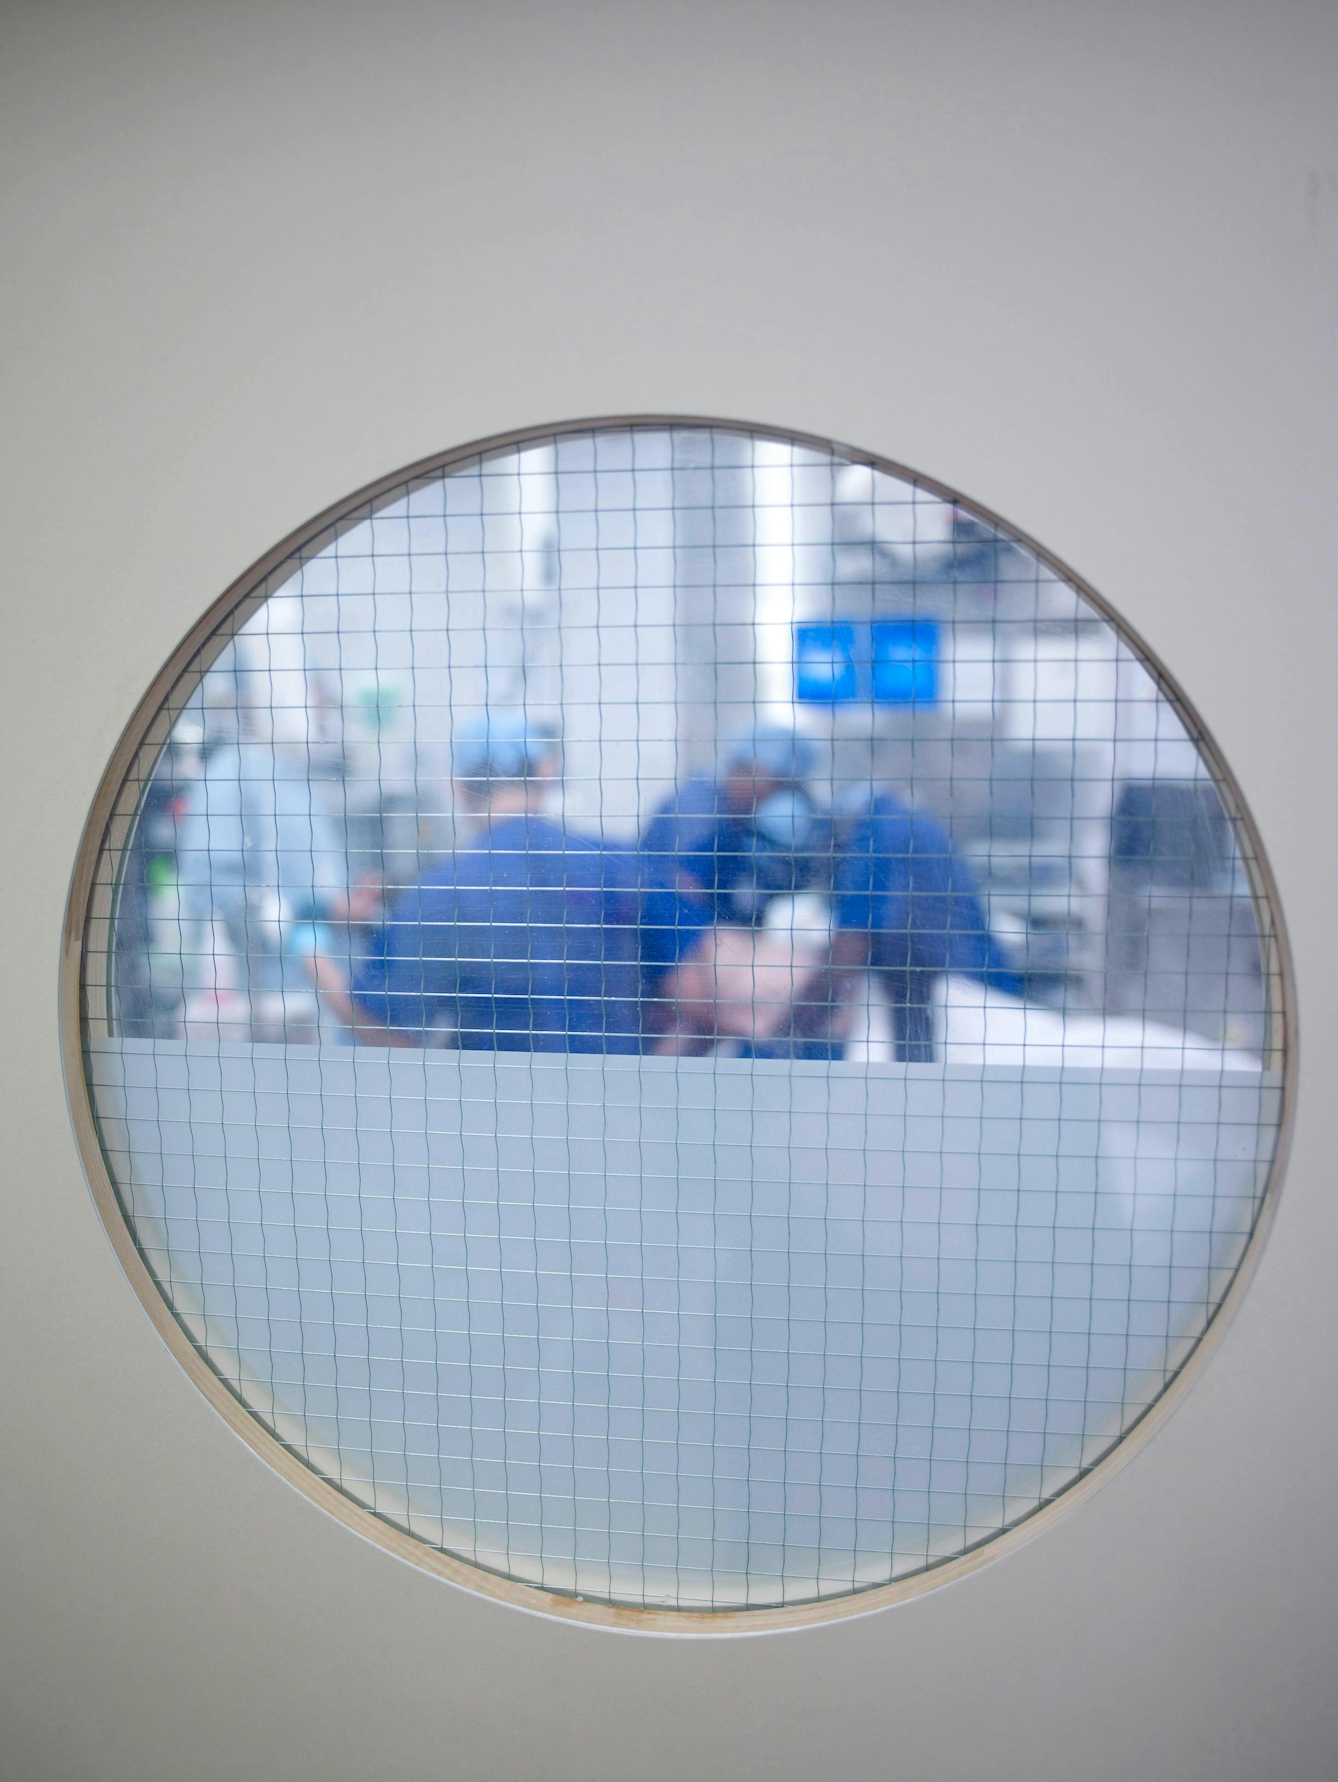 Colour photograph taken through a round window looking into an operating theatre, where staff in blue scrubs, hair covers and masks can be seen preparing the room.